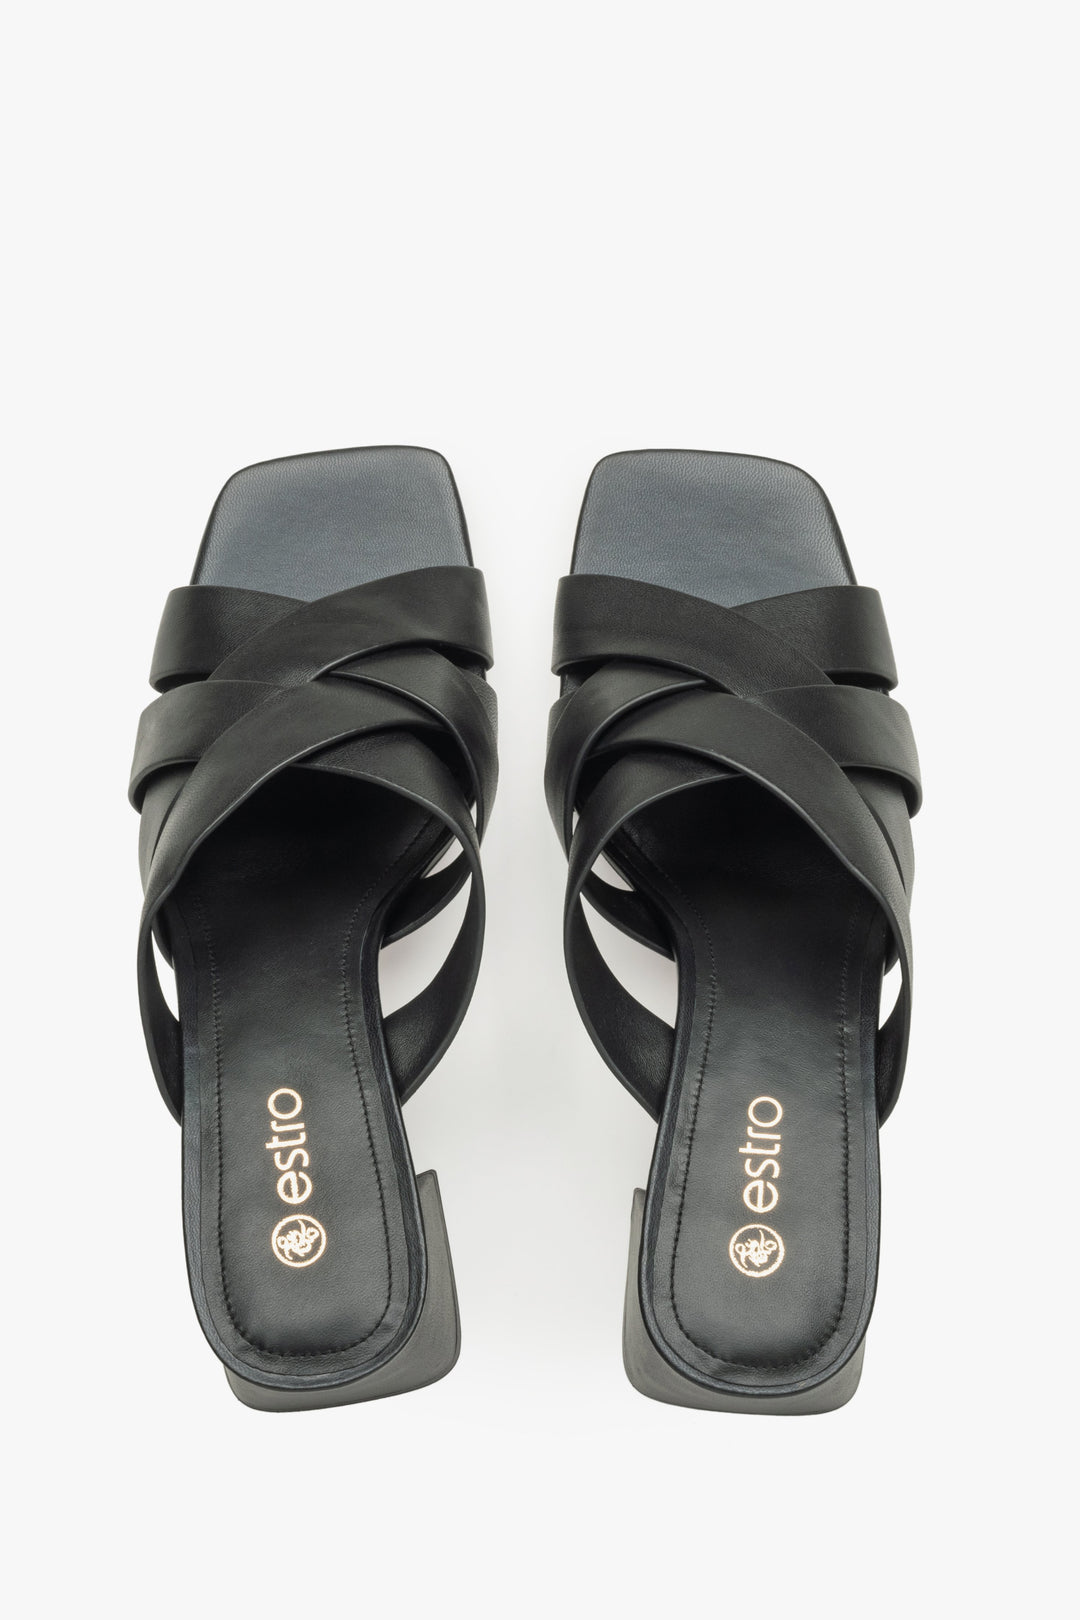 Women's sandals with a block heel made of genuine leather in black color - top view presentation of the model.